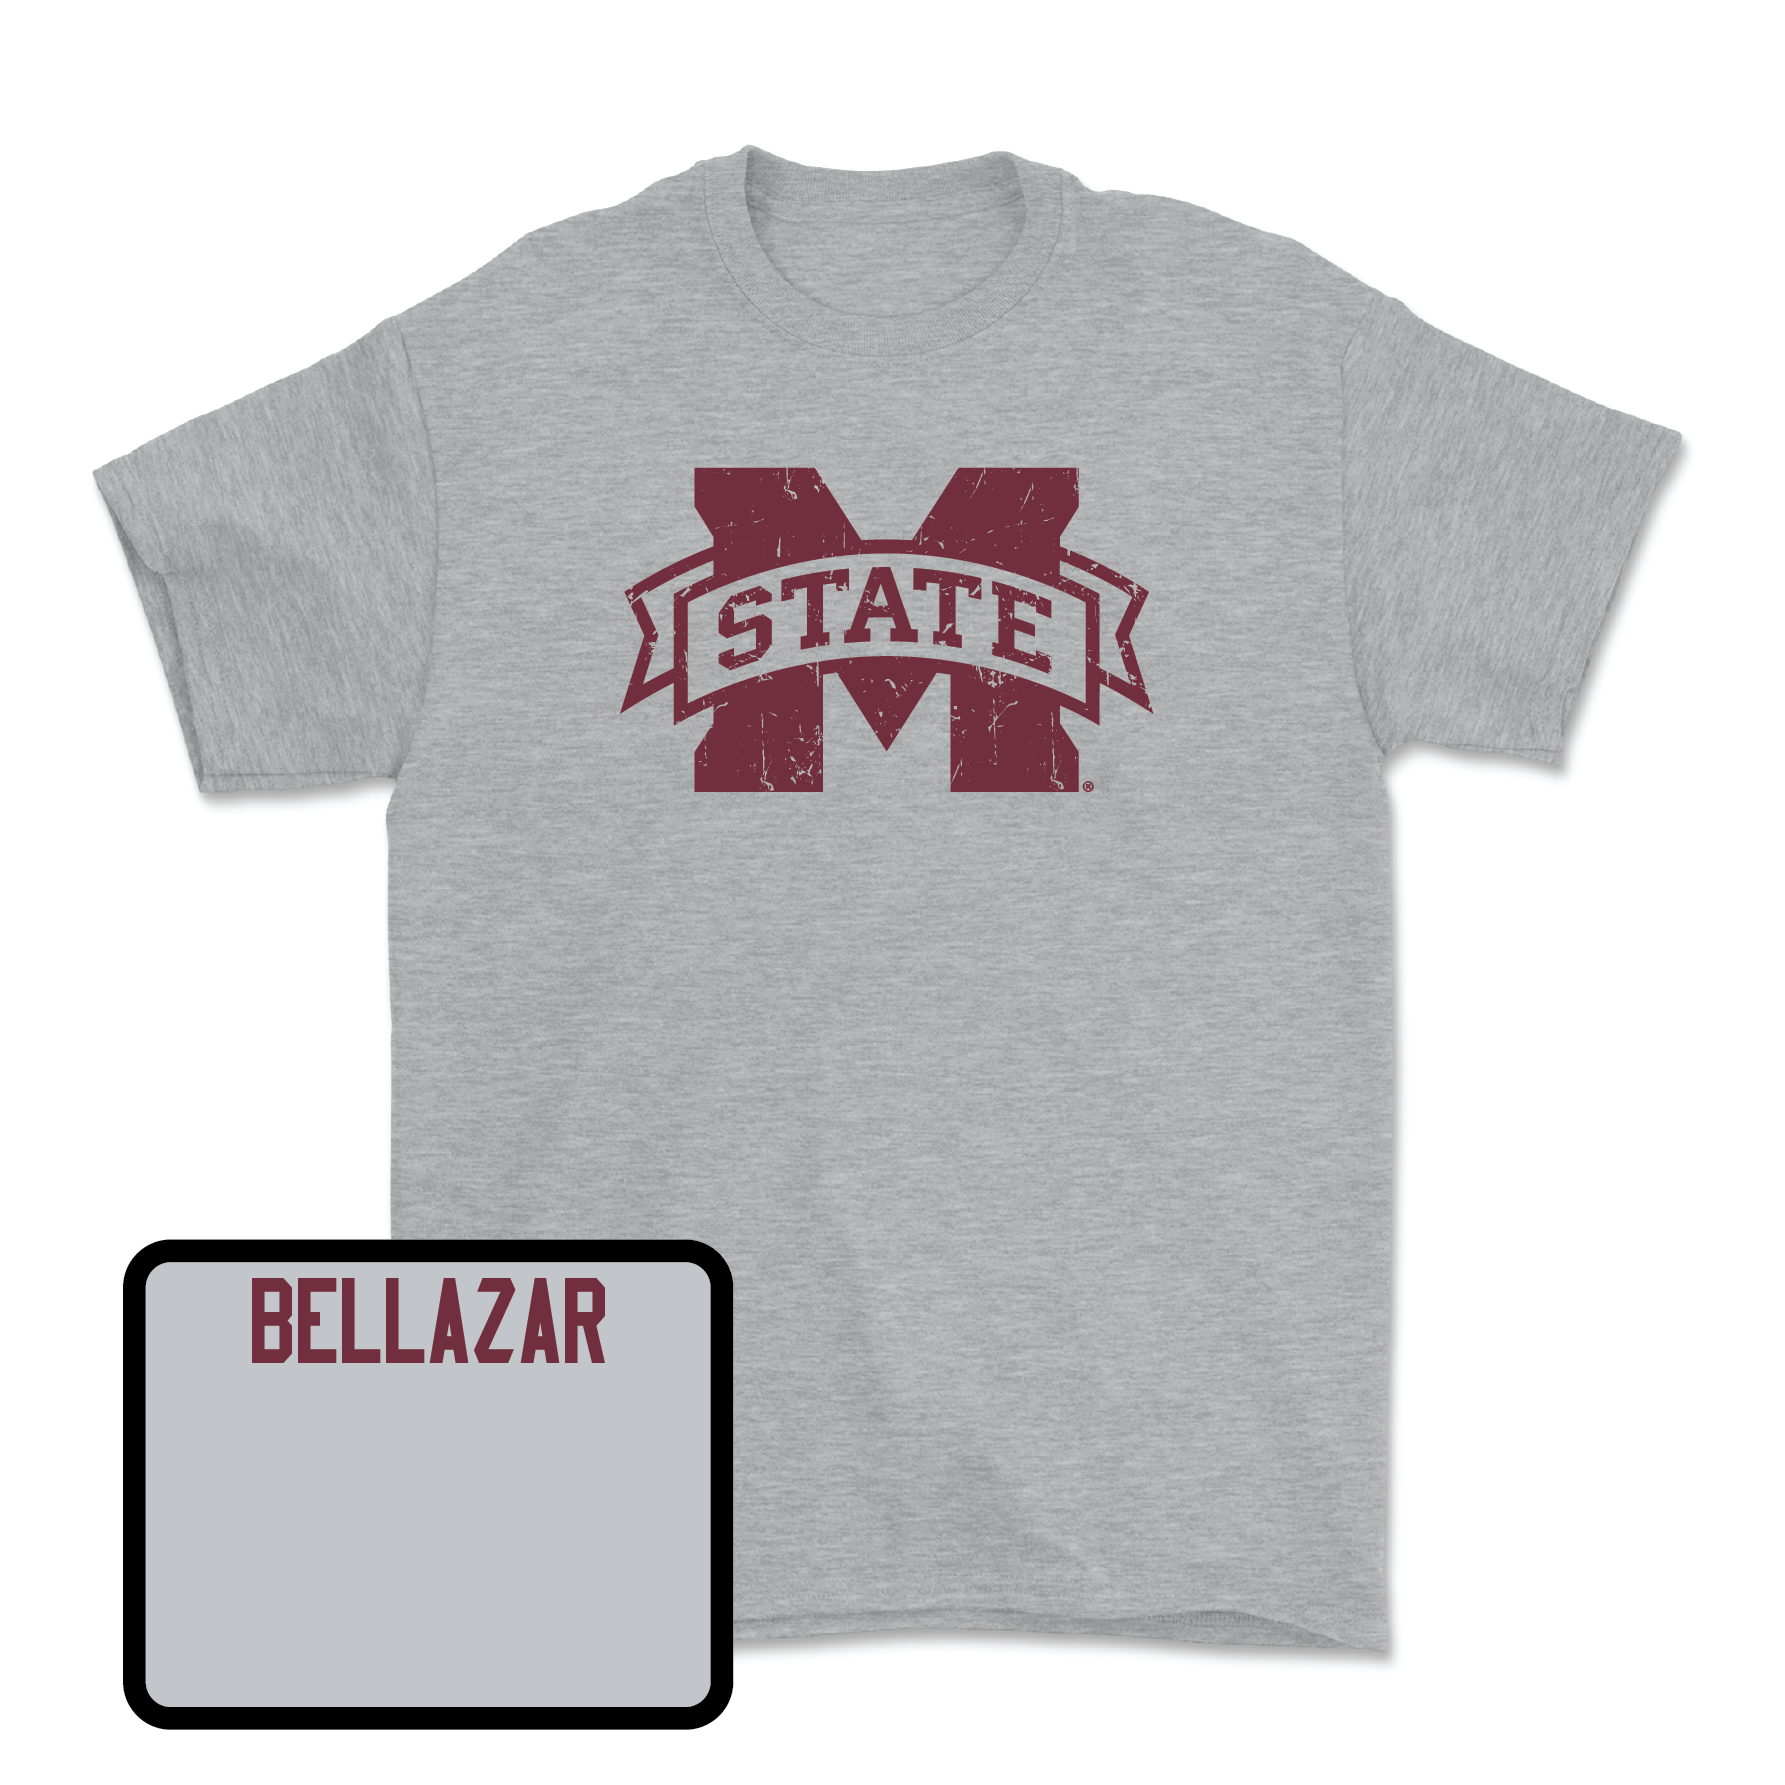 Sport Grey Football Classic Tee X-Large / Jacoby Bellazar | #